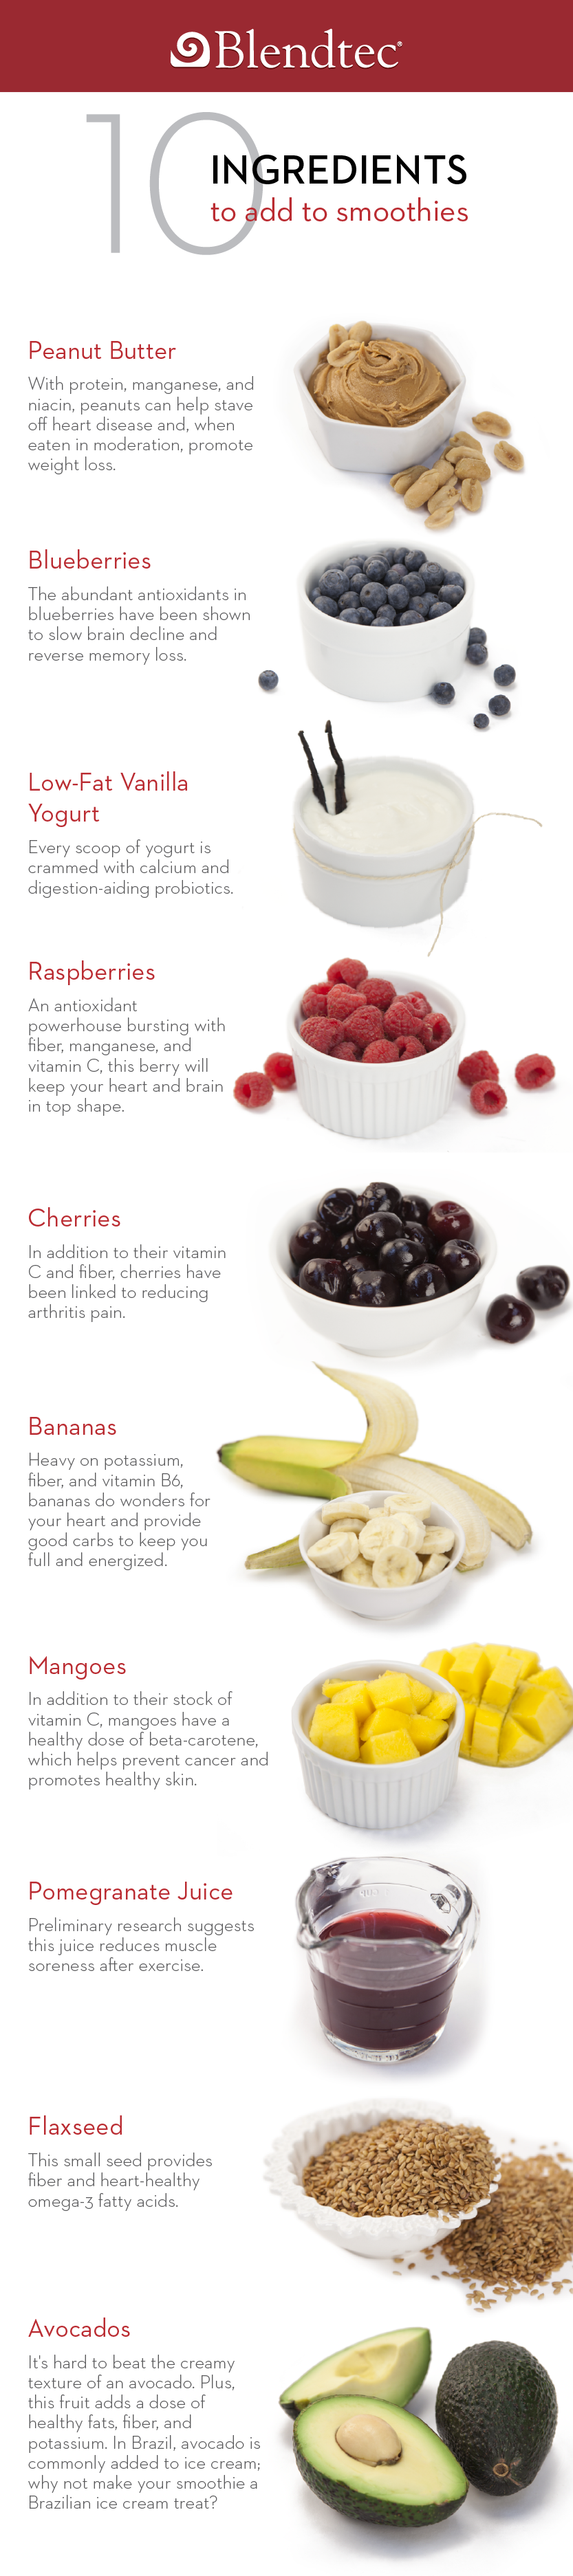 Everything you need to know about how to make a smoothie!